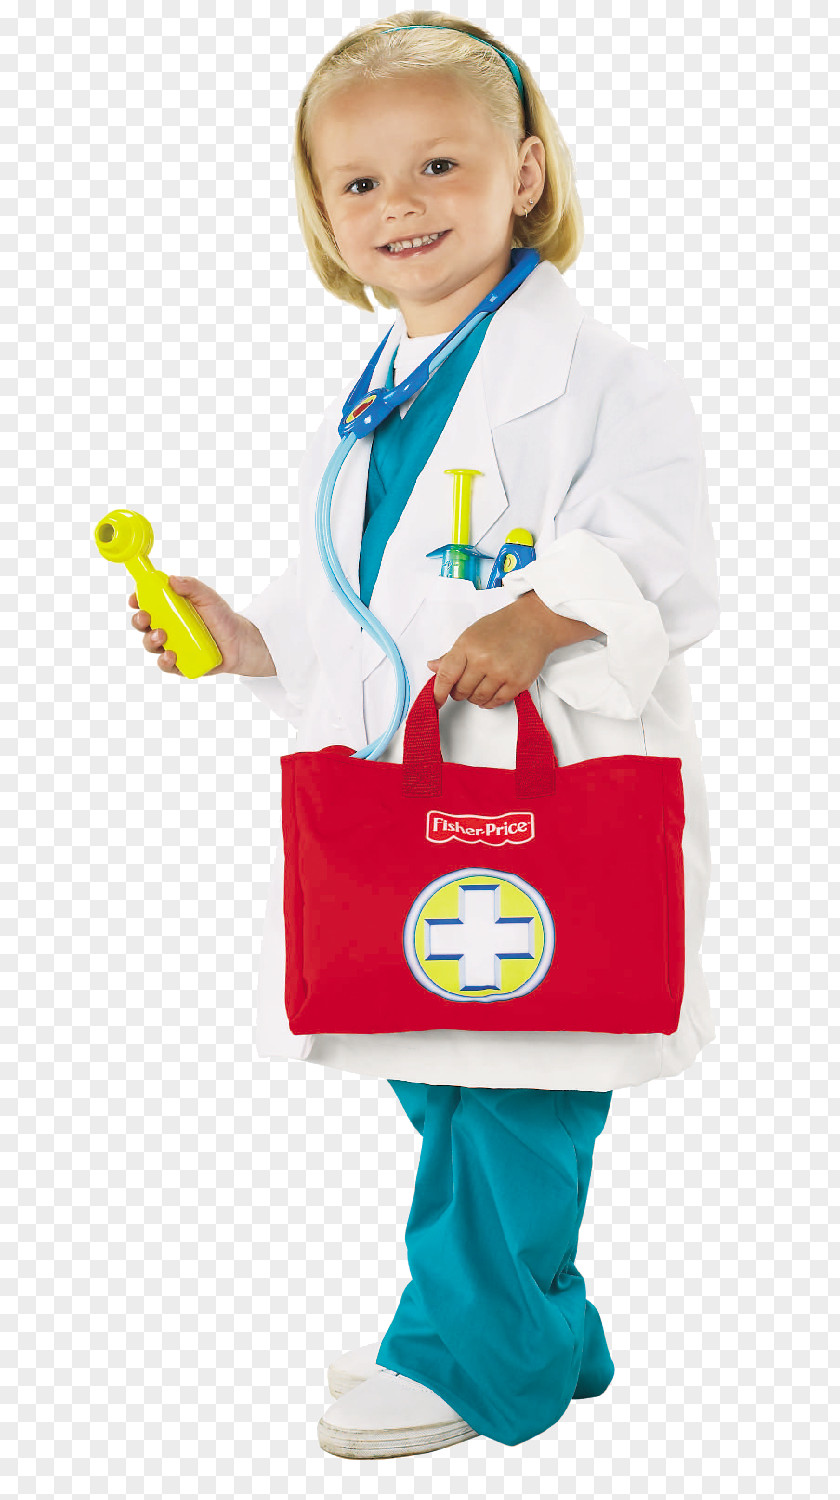 Child Fisher-Price Playing Doctor Physician Toy PNG